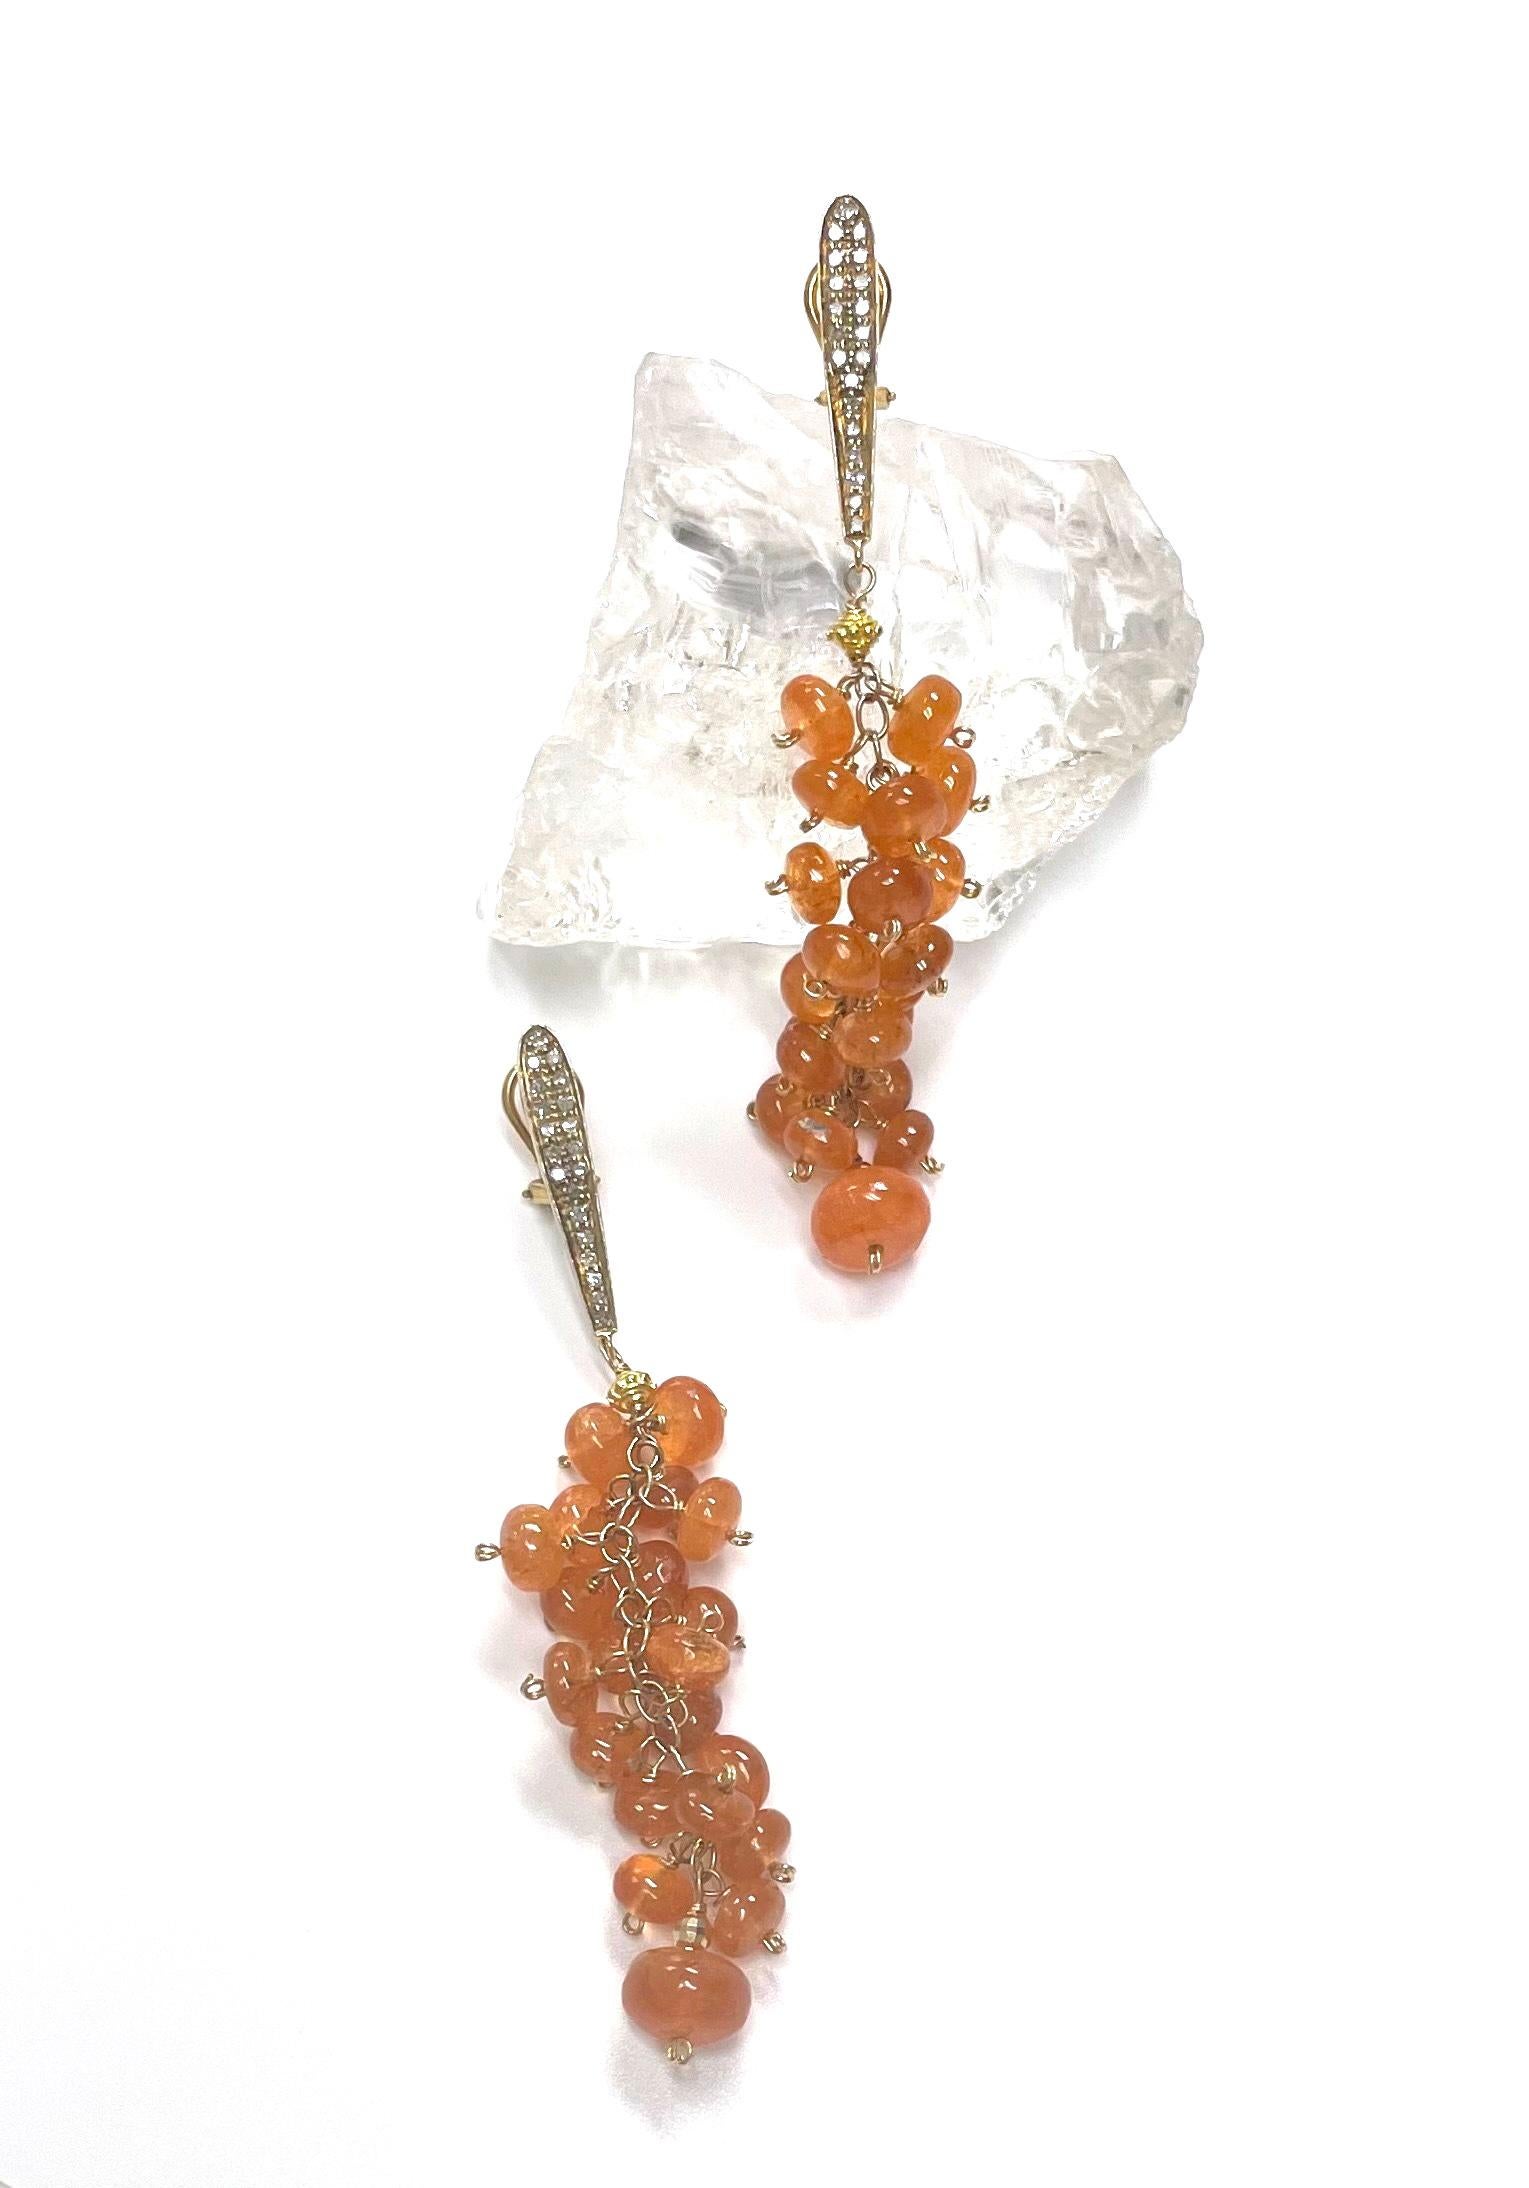 92 Carats Orange Spessartite with Gold and Diamonds Cluster Earrings For Sale 3